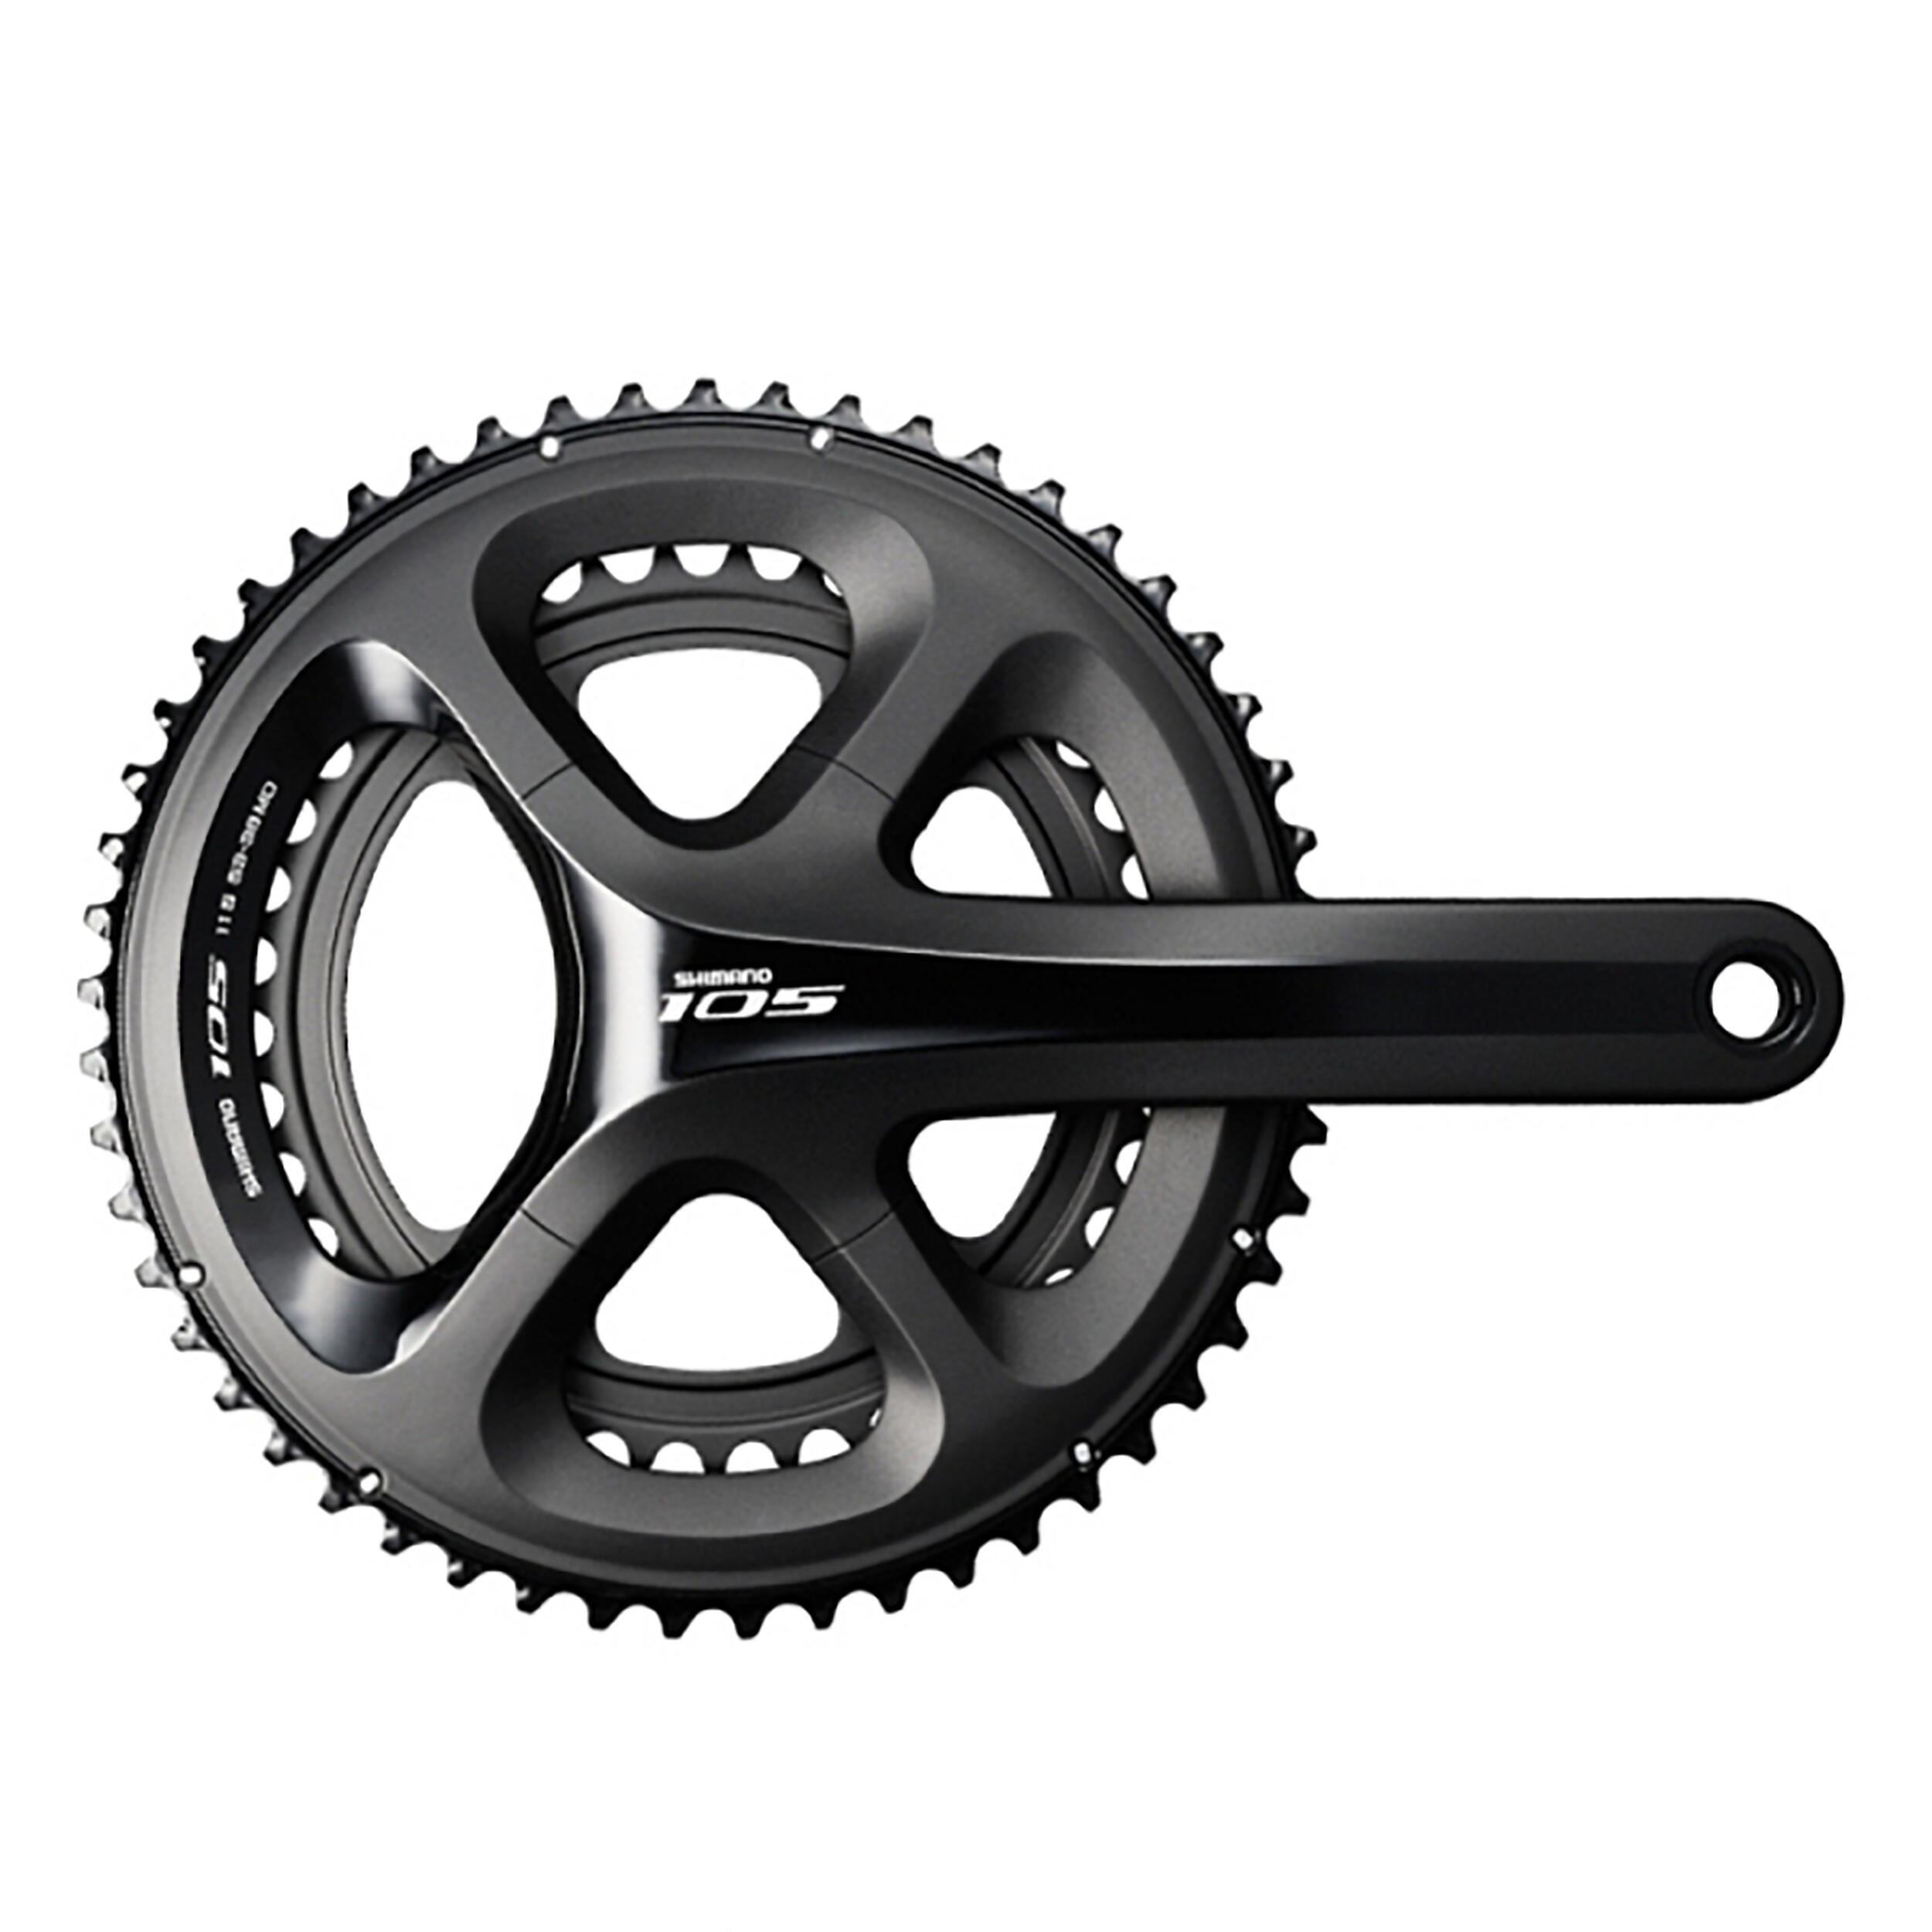 VAN RYSEL Shimano 105 11-Speeds 52x36 Mid Compact 172.5 mm Cranks Road Cycling Chainset